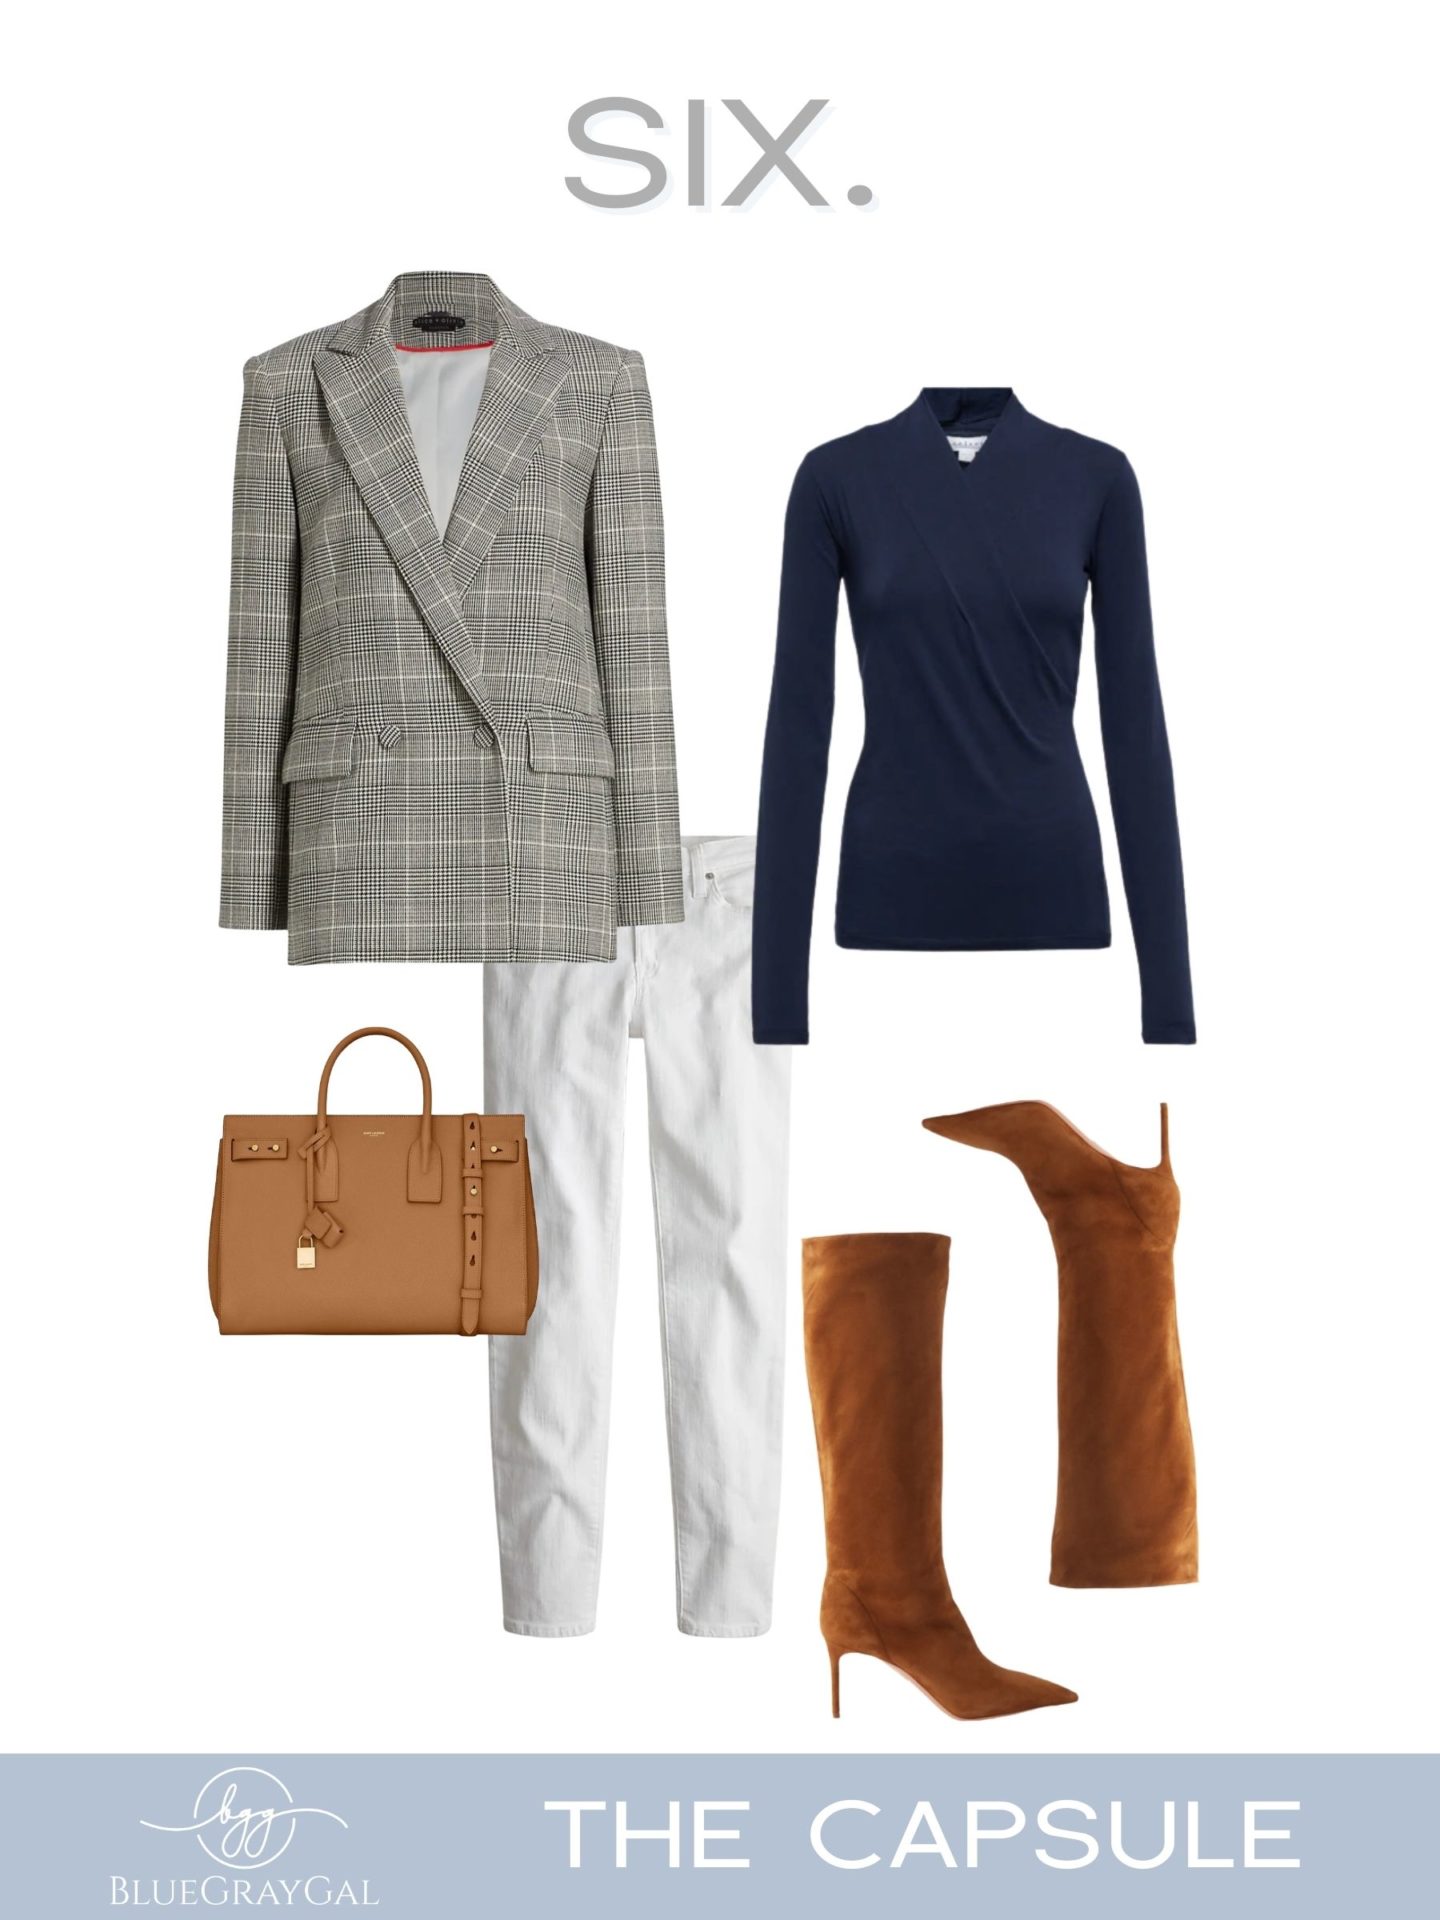 A capsule wardrobe for travel to europe with plaid blazer, leather accessories and blue wrap top.